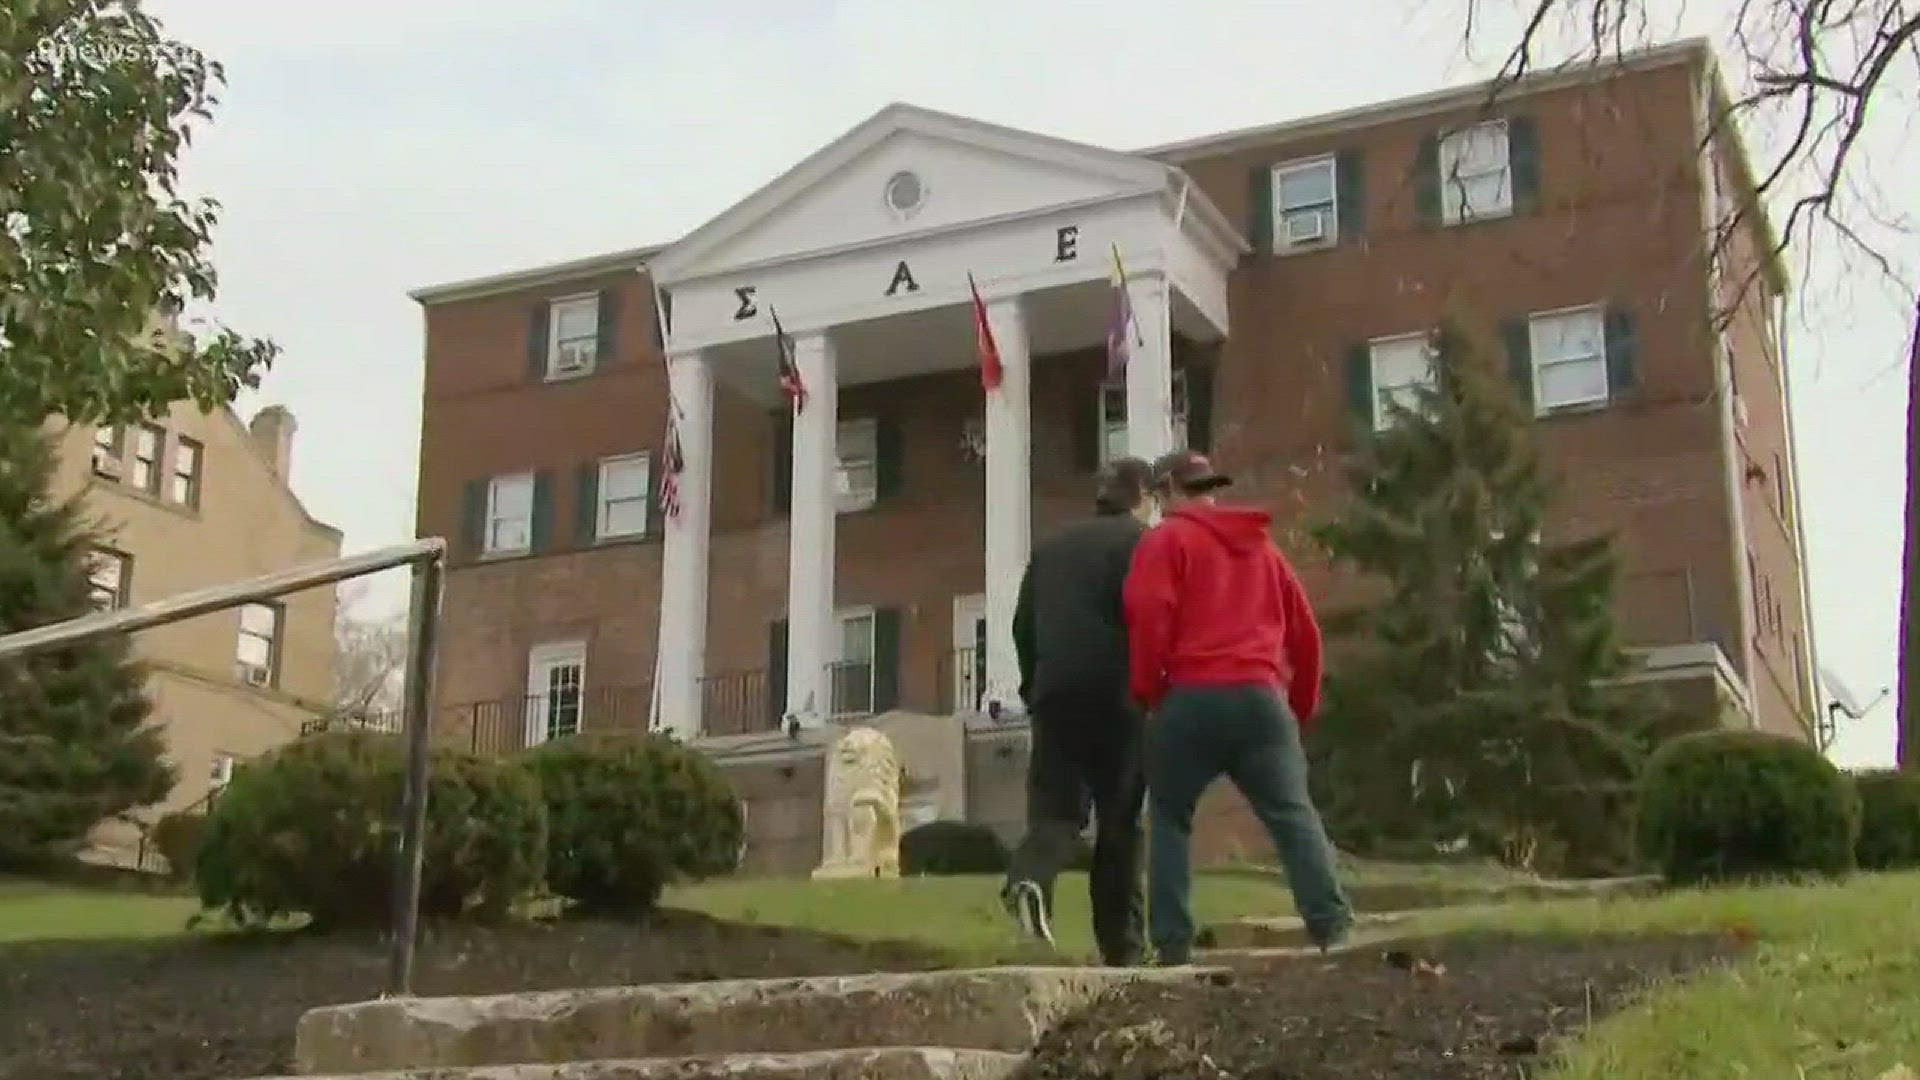 After tragedies at college campuses across the country, fraternities and sororities are examining Greek life culture.